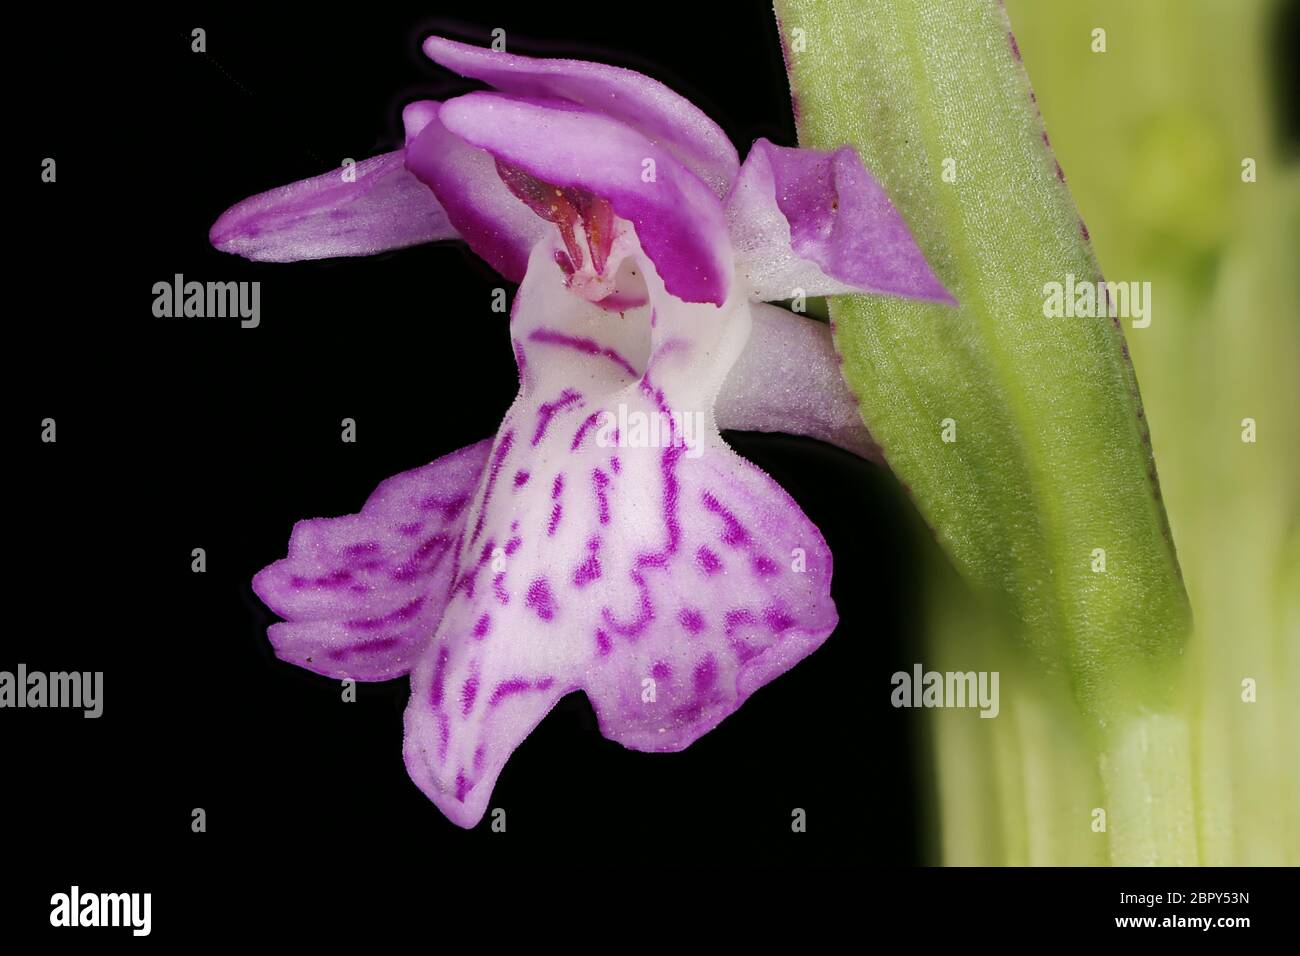 Baltic Spotted Orchid (Dactylorhiza baltica). Flower Closeup Stock Photo